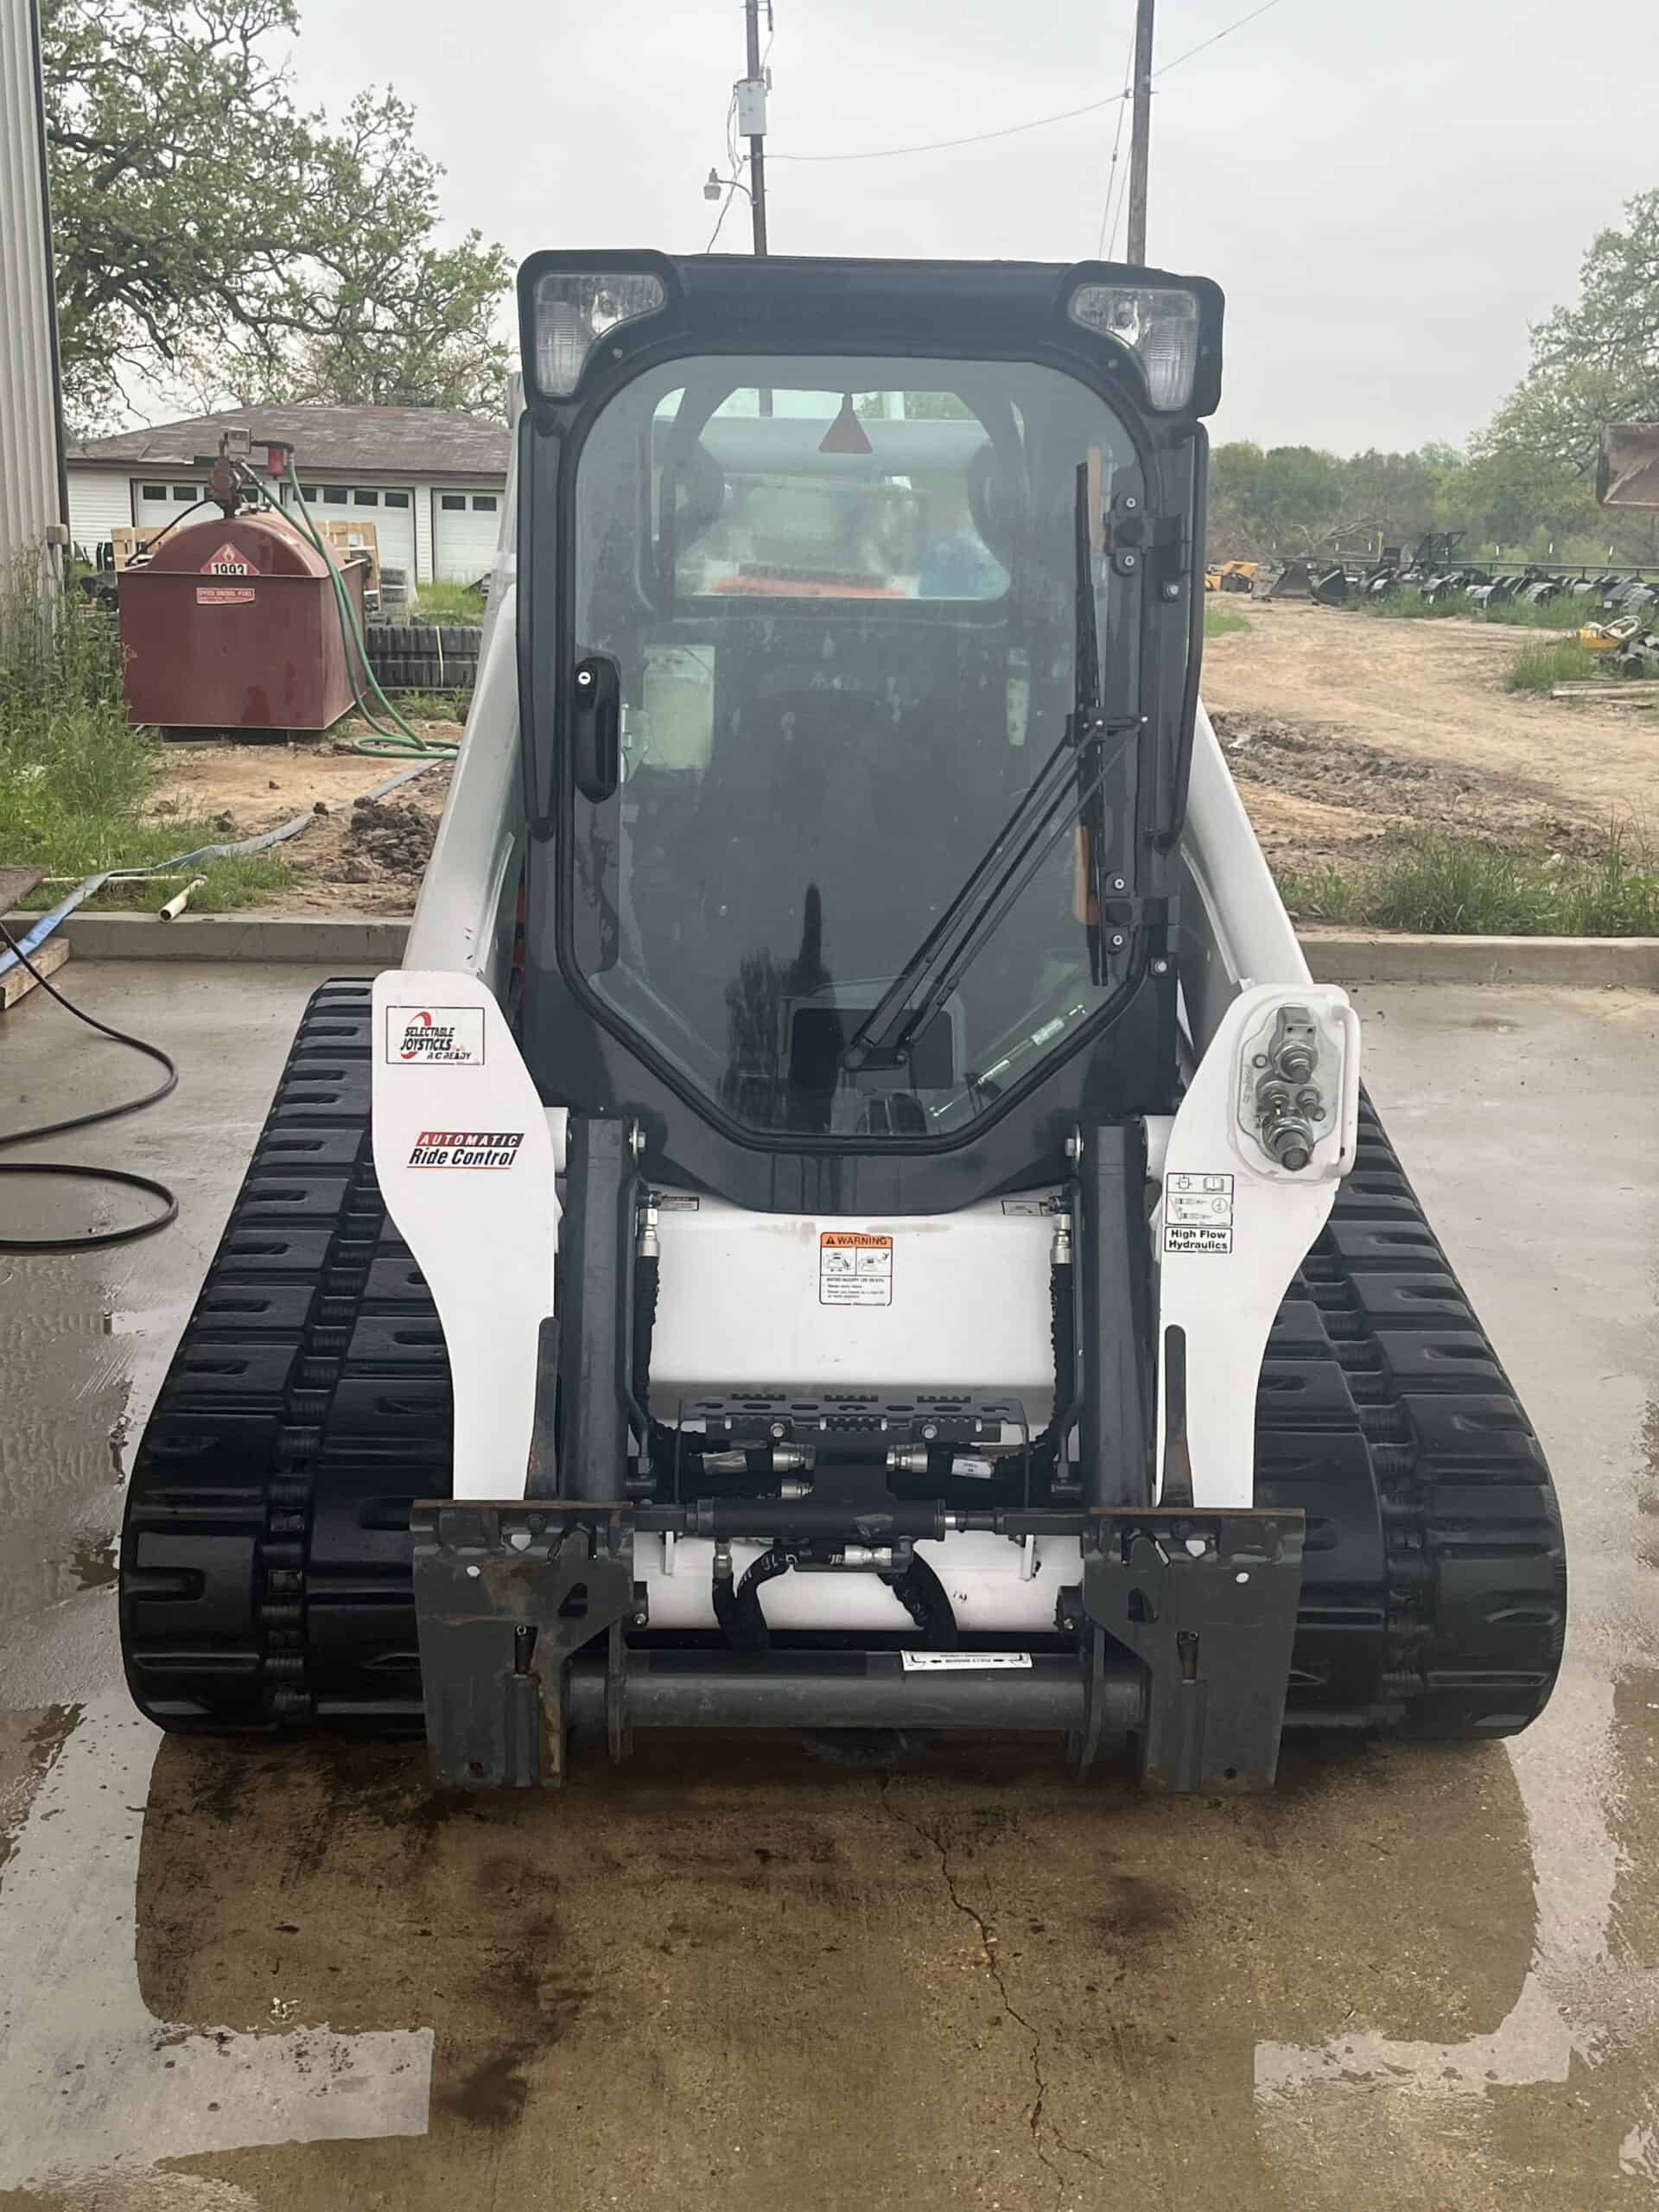 Buy a Used 2022 T740-U BOBCAT COMPACT TRACK LOADER from Bobcat of Houston